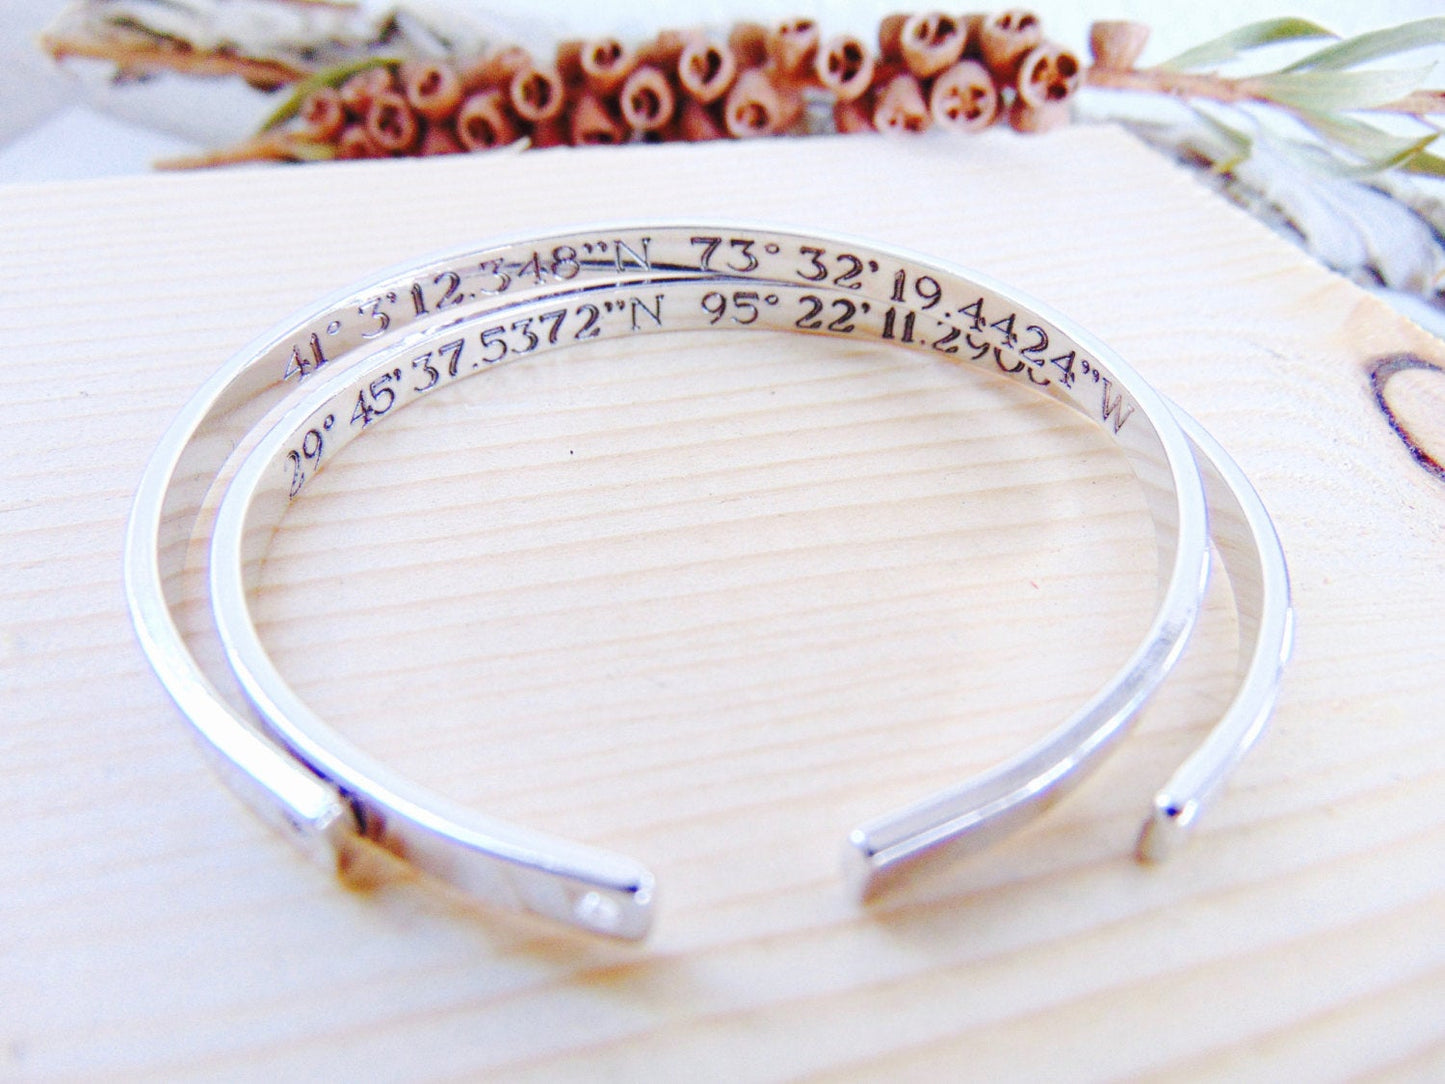 Personalized engraved cuff Bracelet in gold, silver, rose gold - choose your mantra